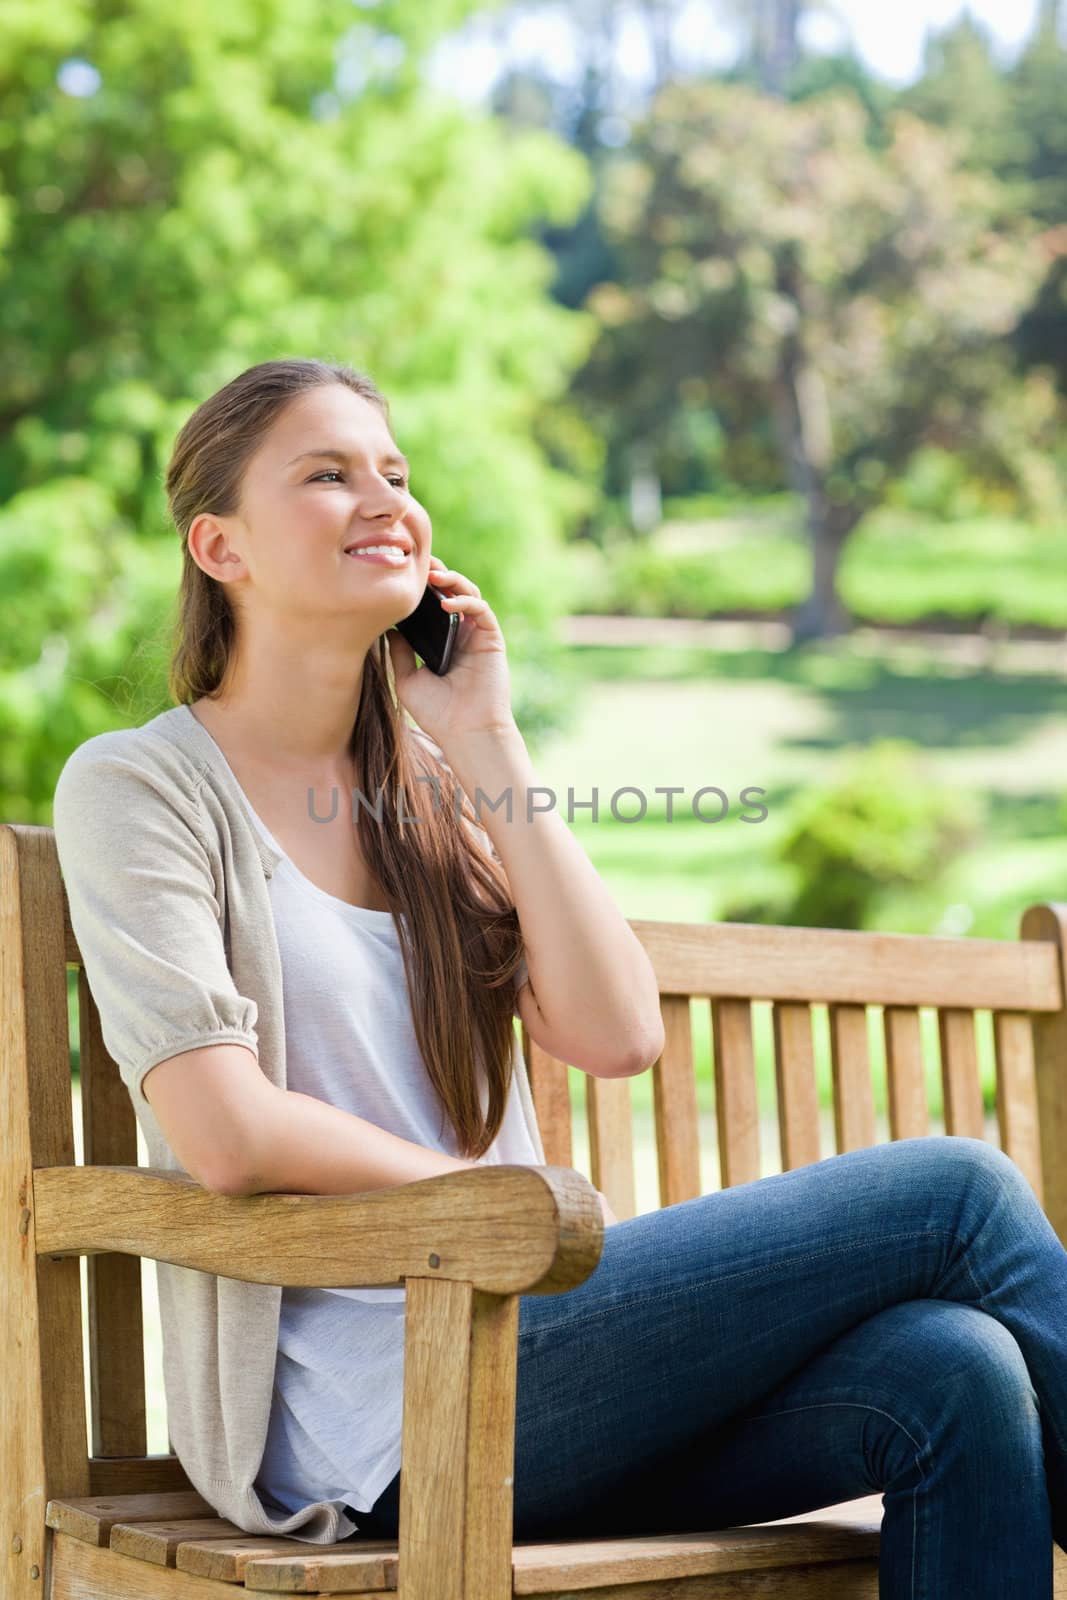 Smiling young woman sitting with her cellphone on a park bench